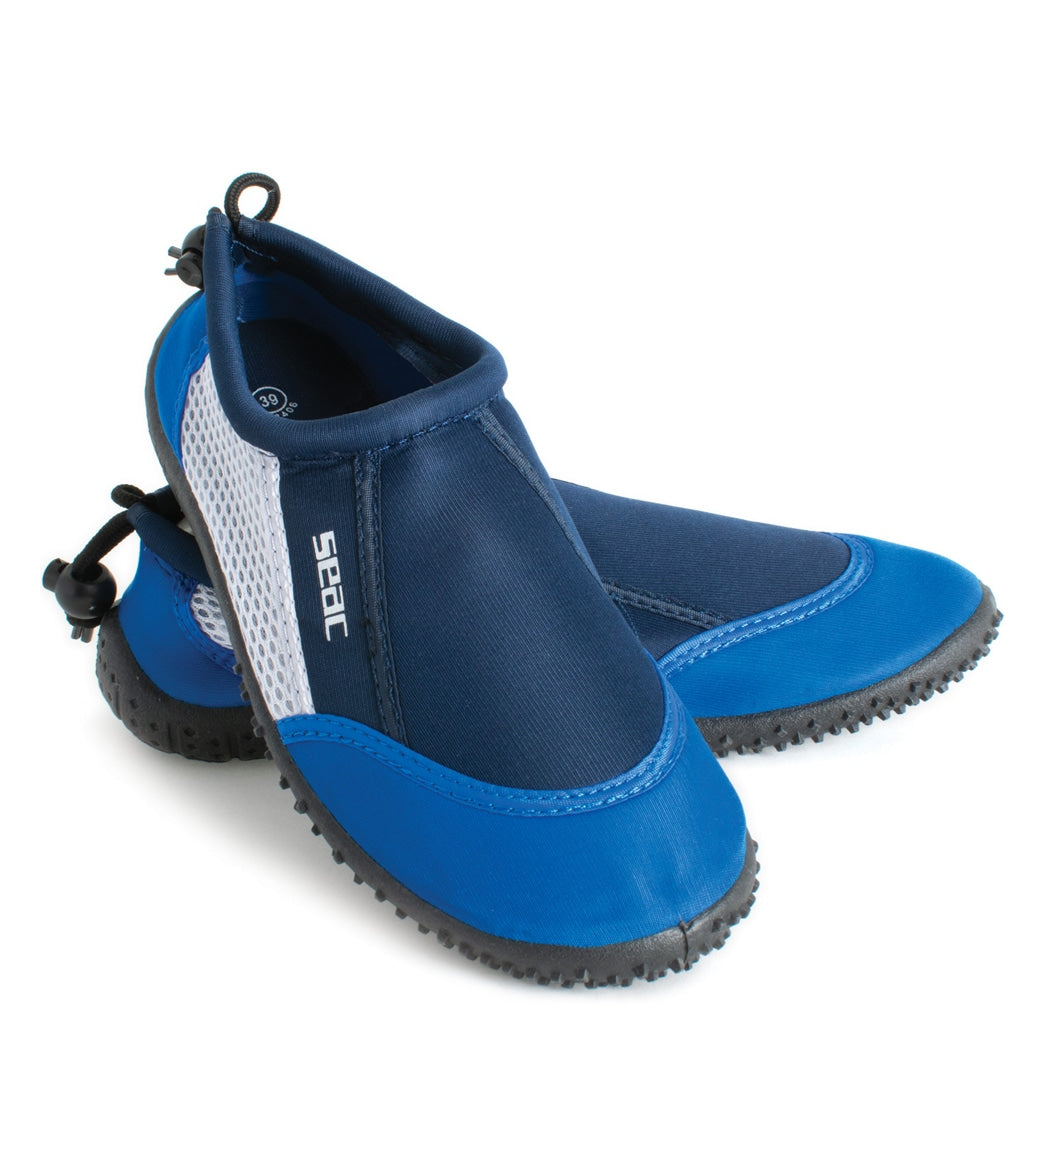 Seac USA Reef Water Shoes at SwimOutlet